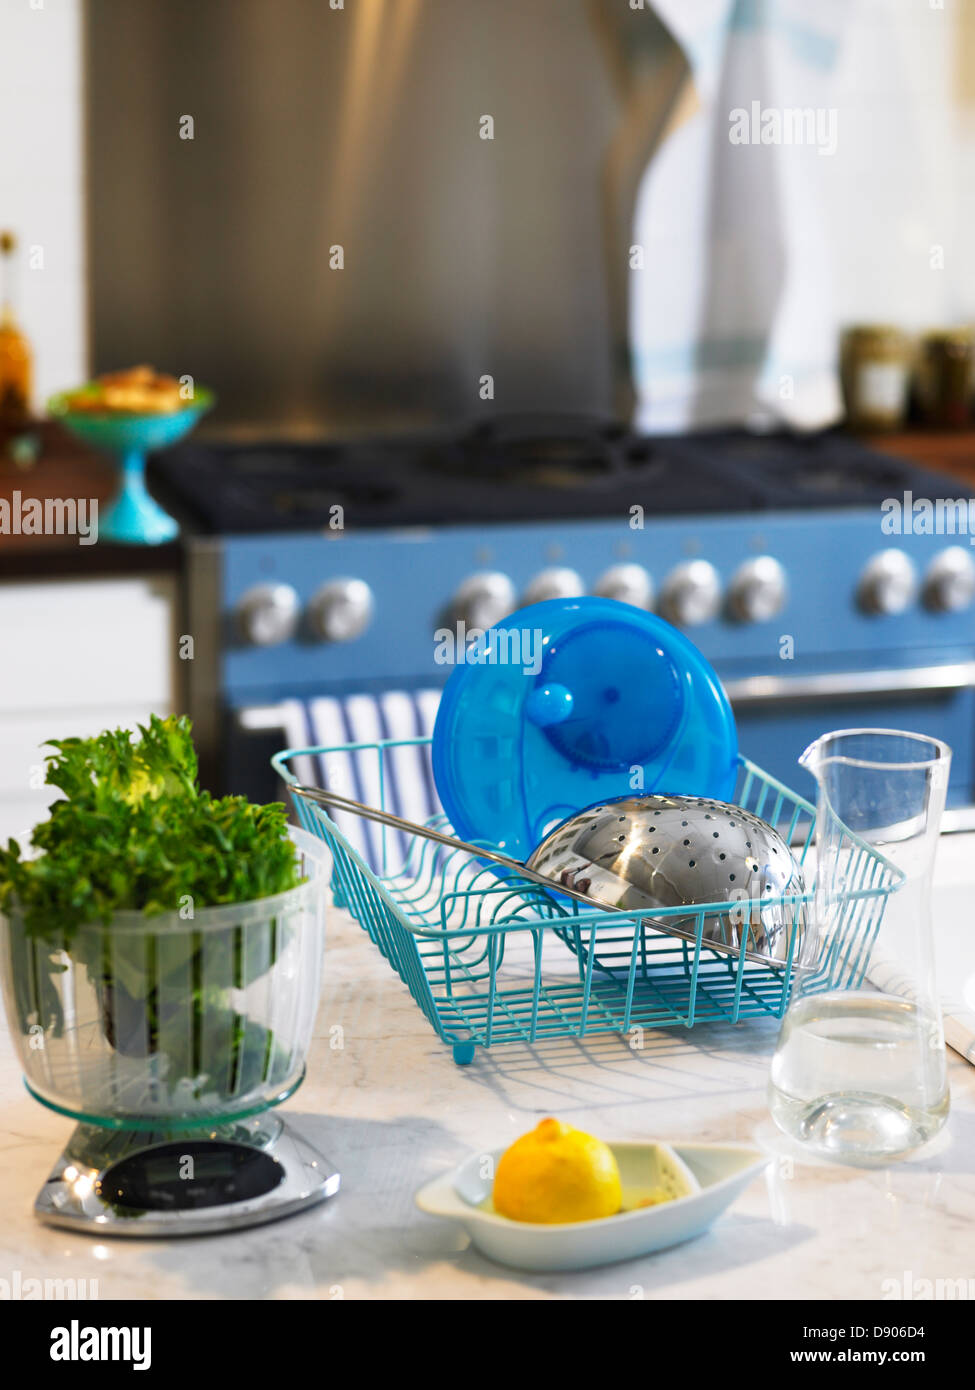 A colander and a salad spinner in a dish rack. Stock Photo